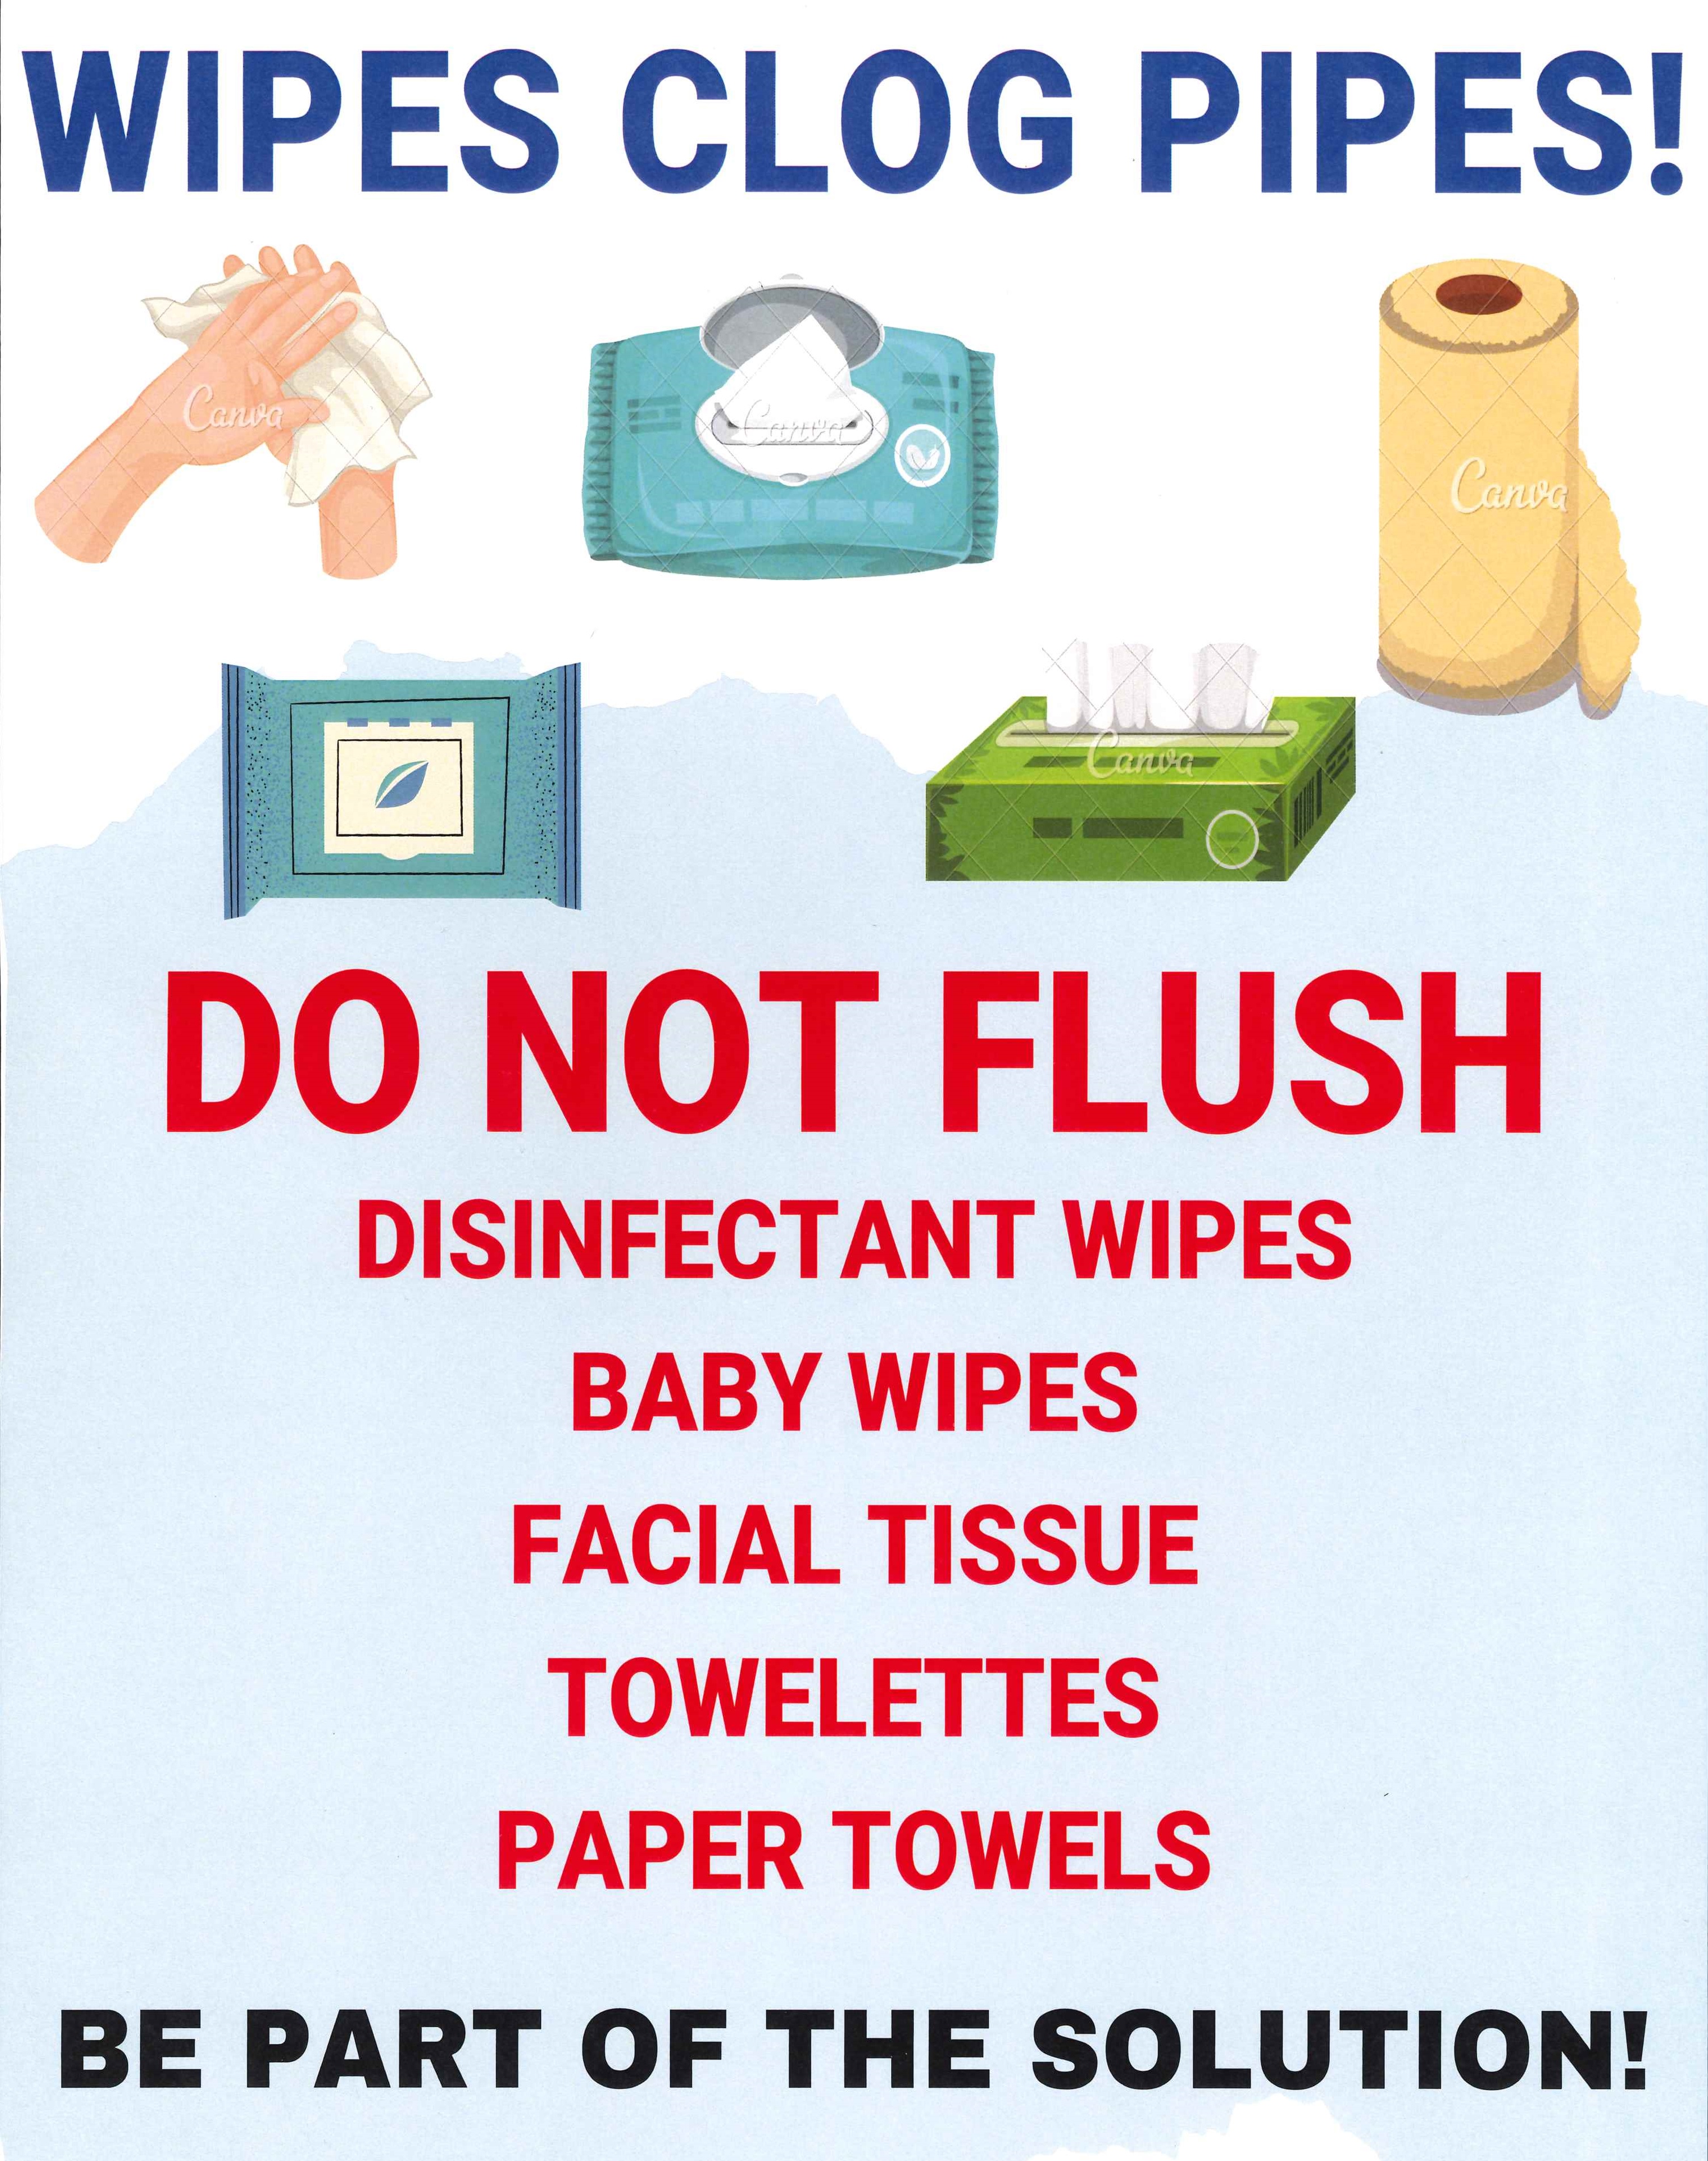 Do not flush disinfectant wipes, baby wipes, facial tissue, towelettes, or paper towels.